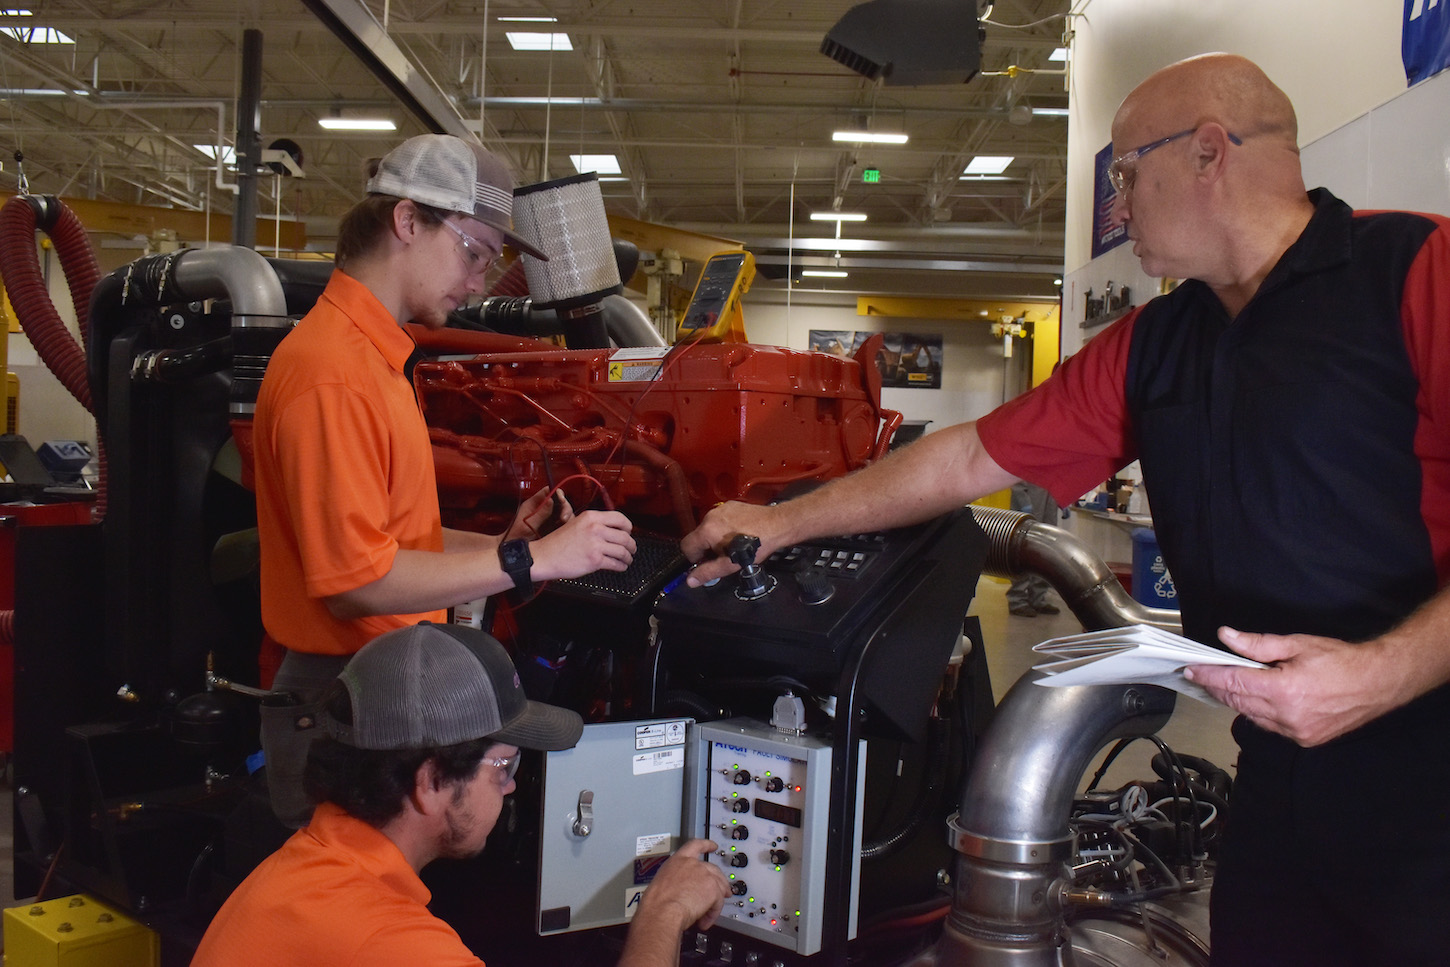 Students work on a diesel trainer